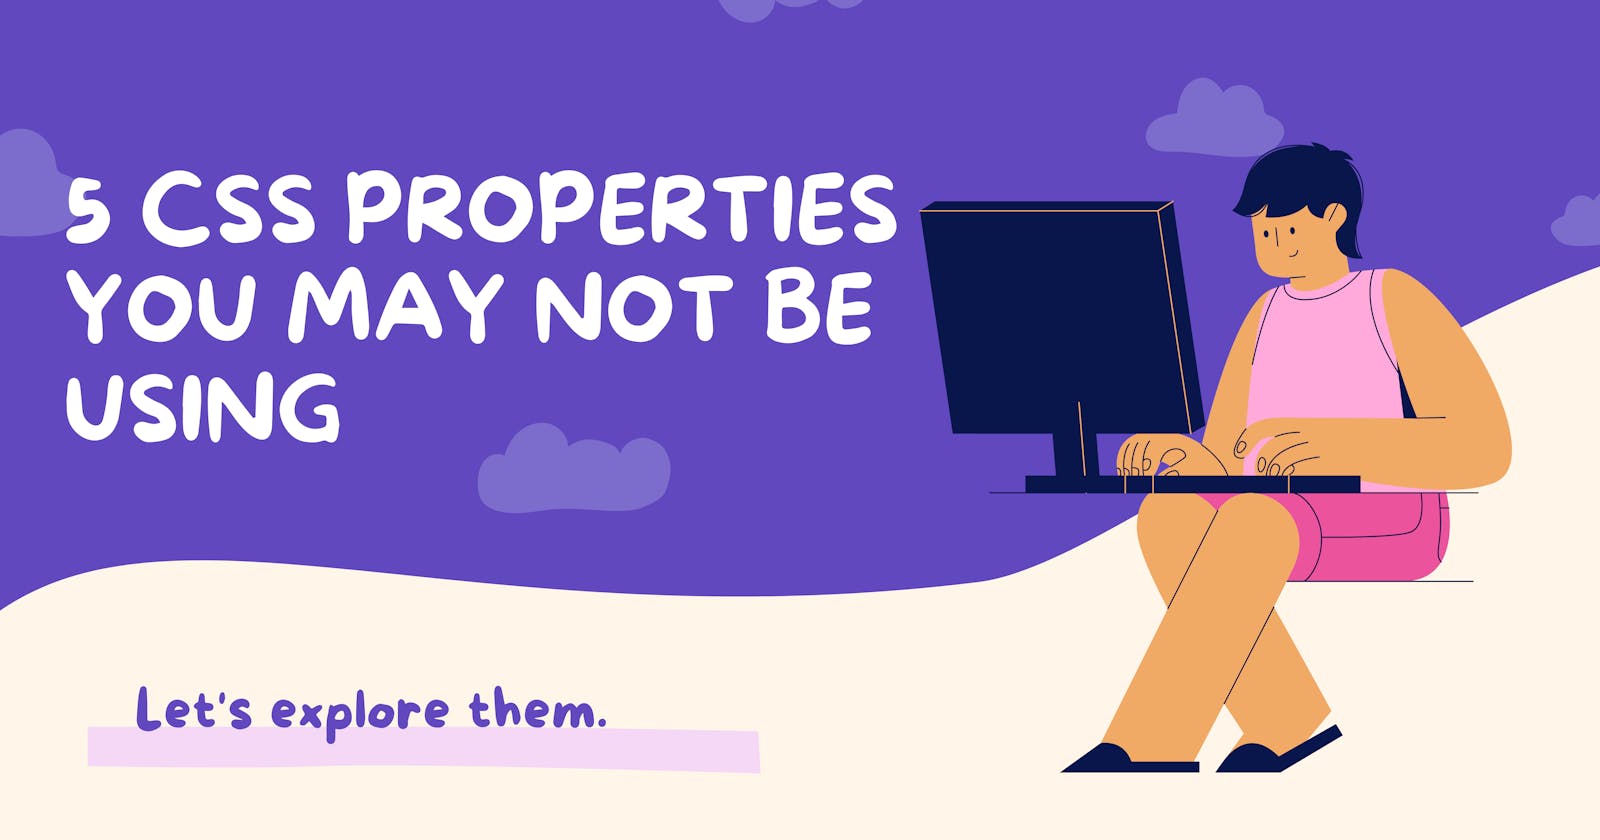 5 CSS properties you may not be using.